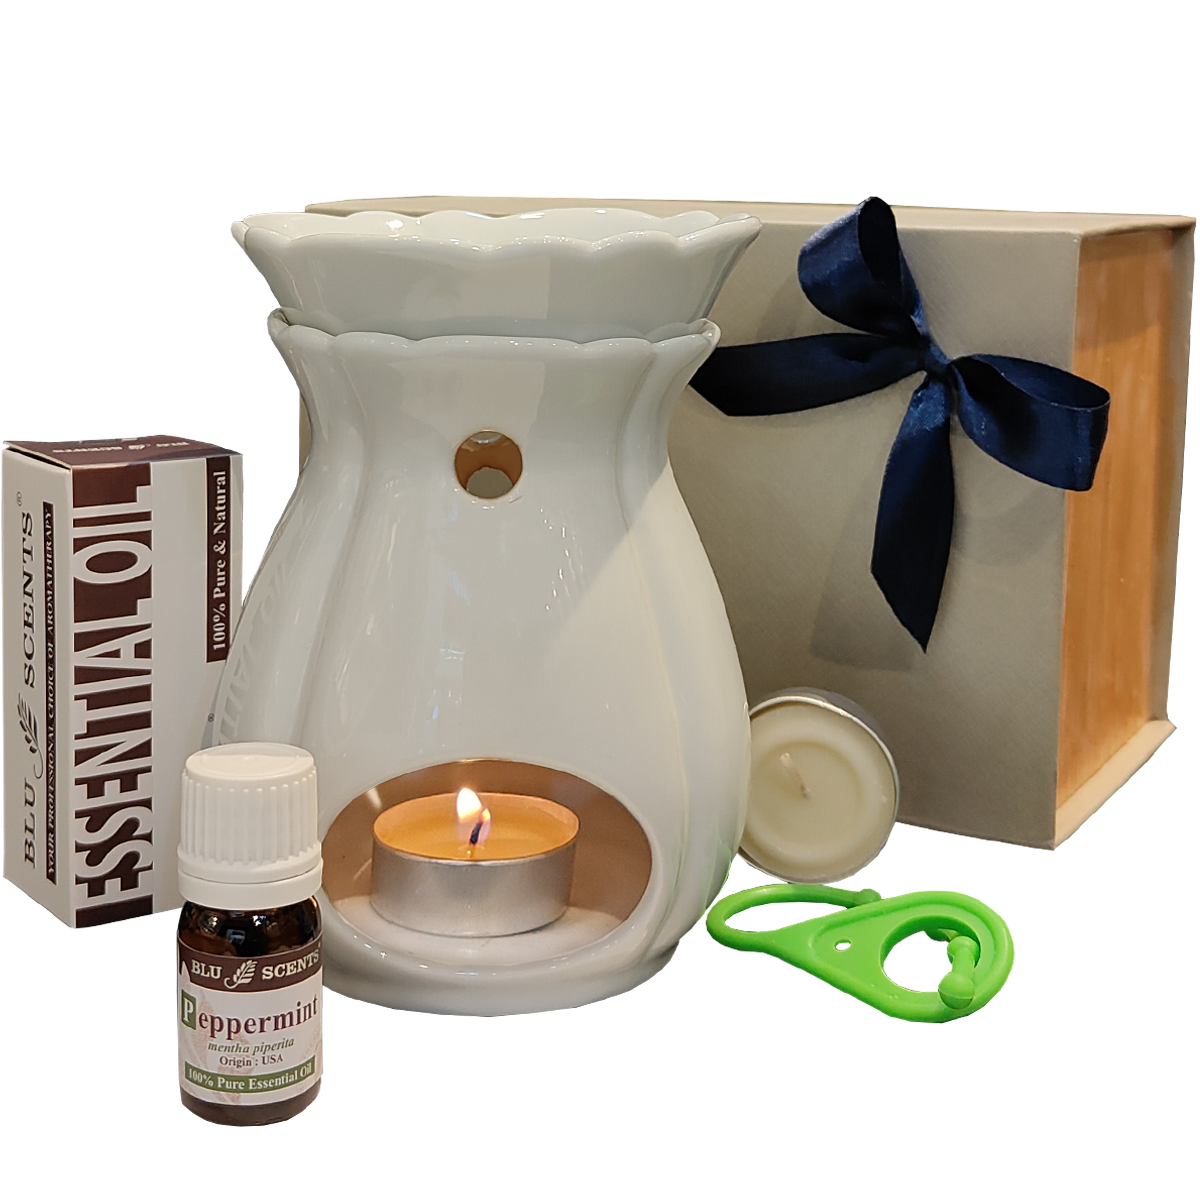 Refresh Peppermint with Tulip Burner Gift